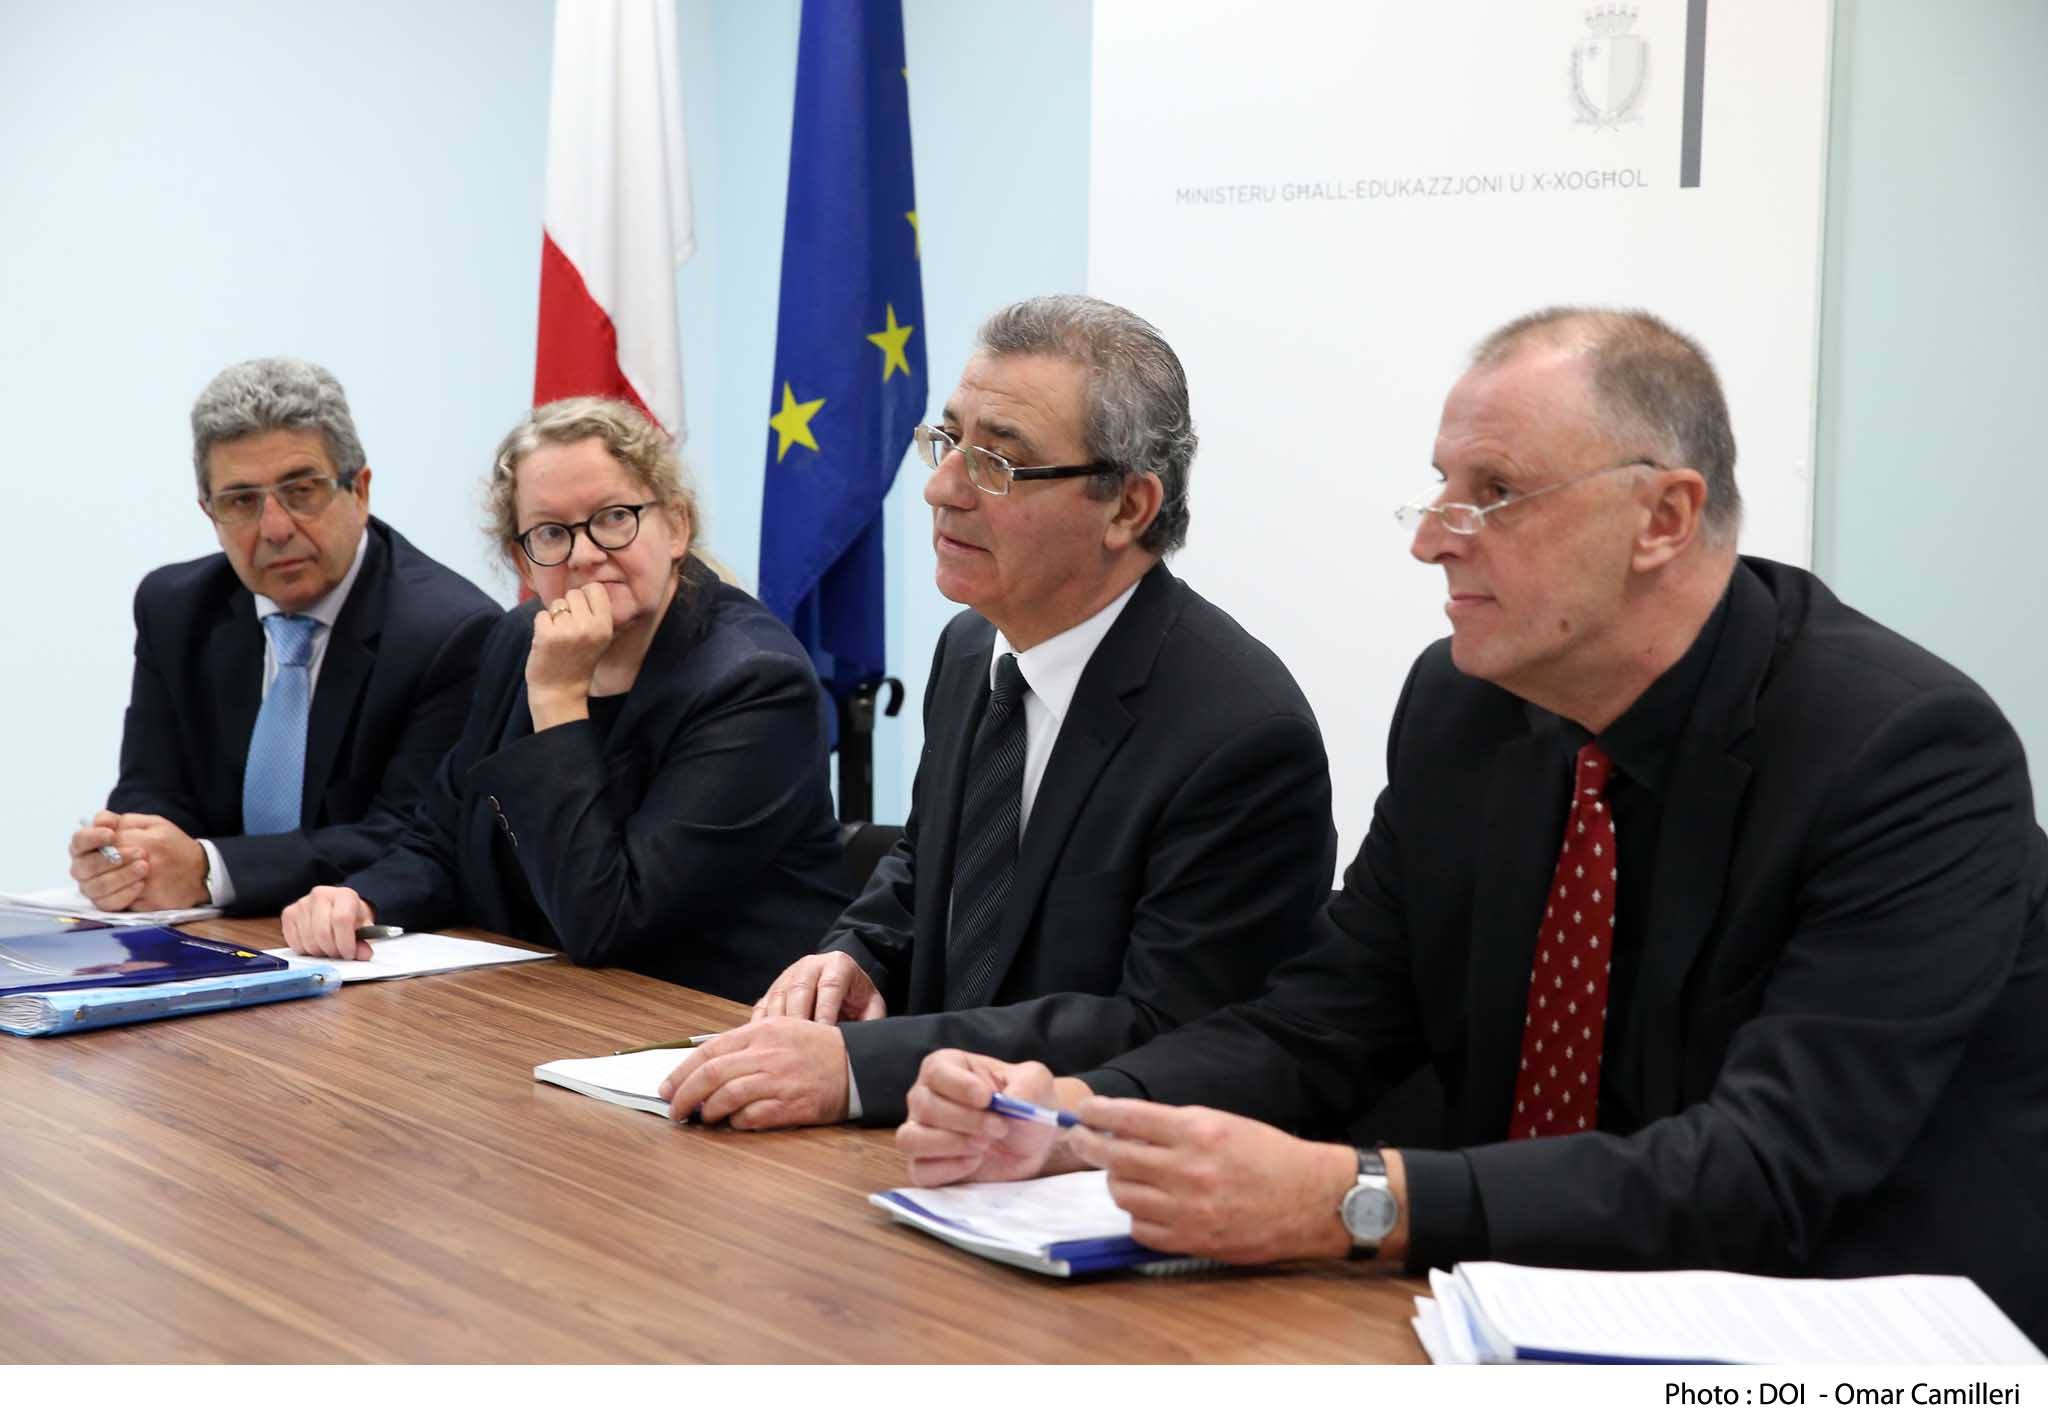 External Audit Report Launched in Malta